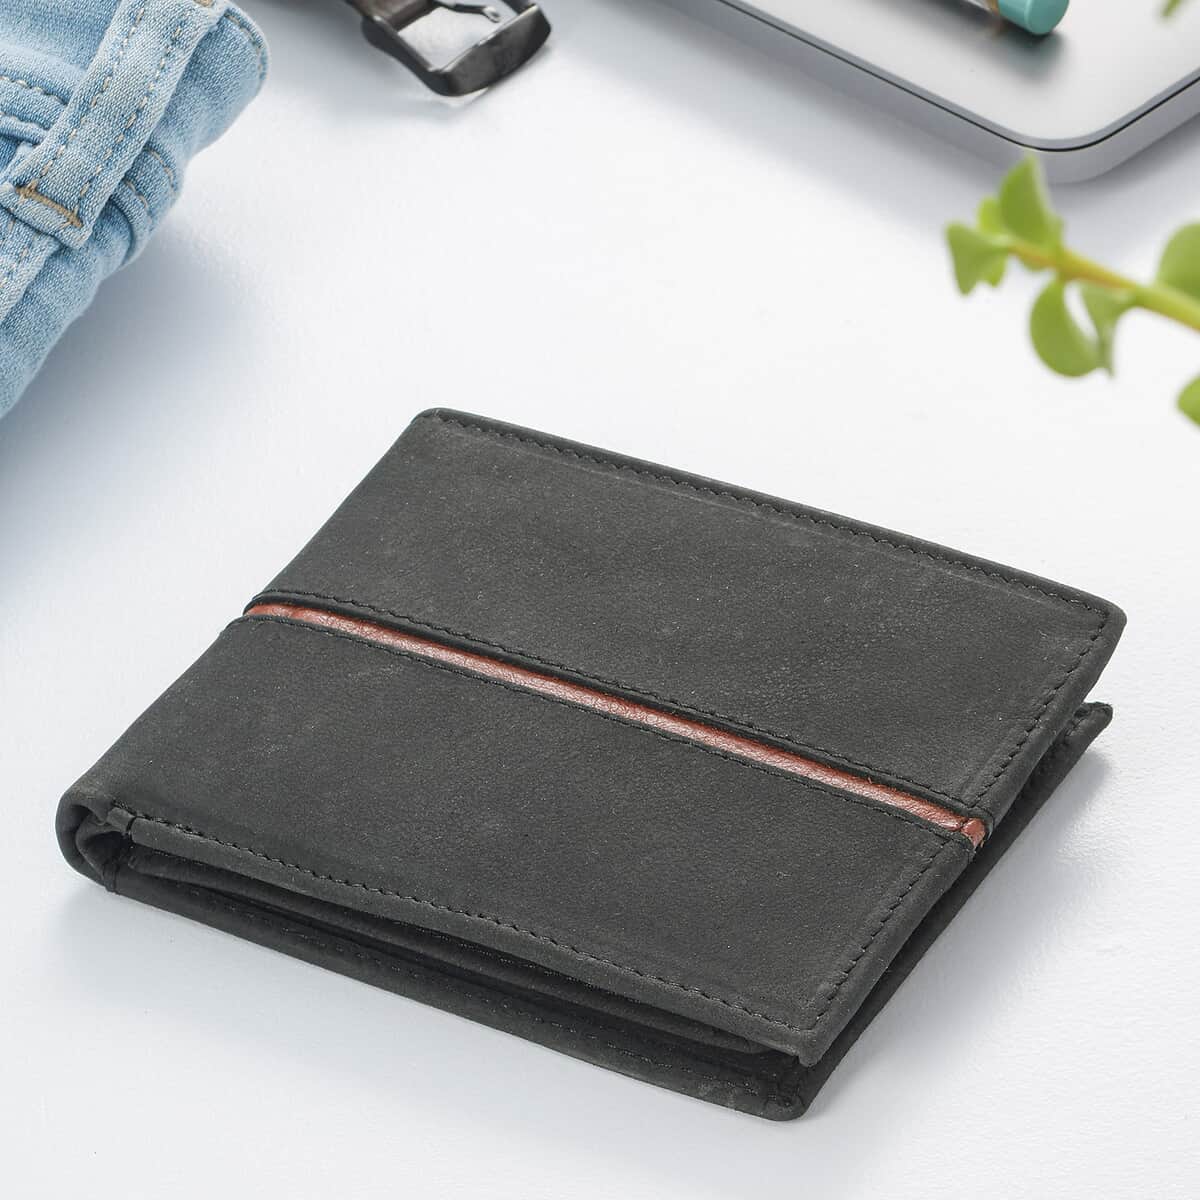 "UNION CODE Genuine Leather Bi Fold Men's Wallet (RFID Protected) SIZE: 4.25(L)x3.25(H) inches COLOR: Black" image number 1